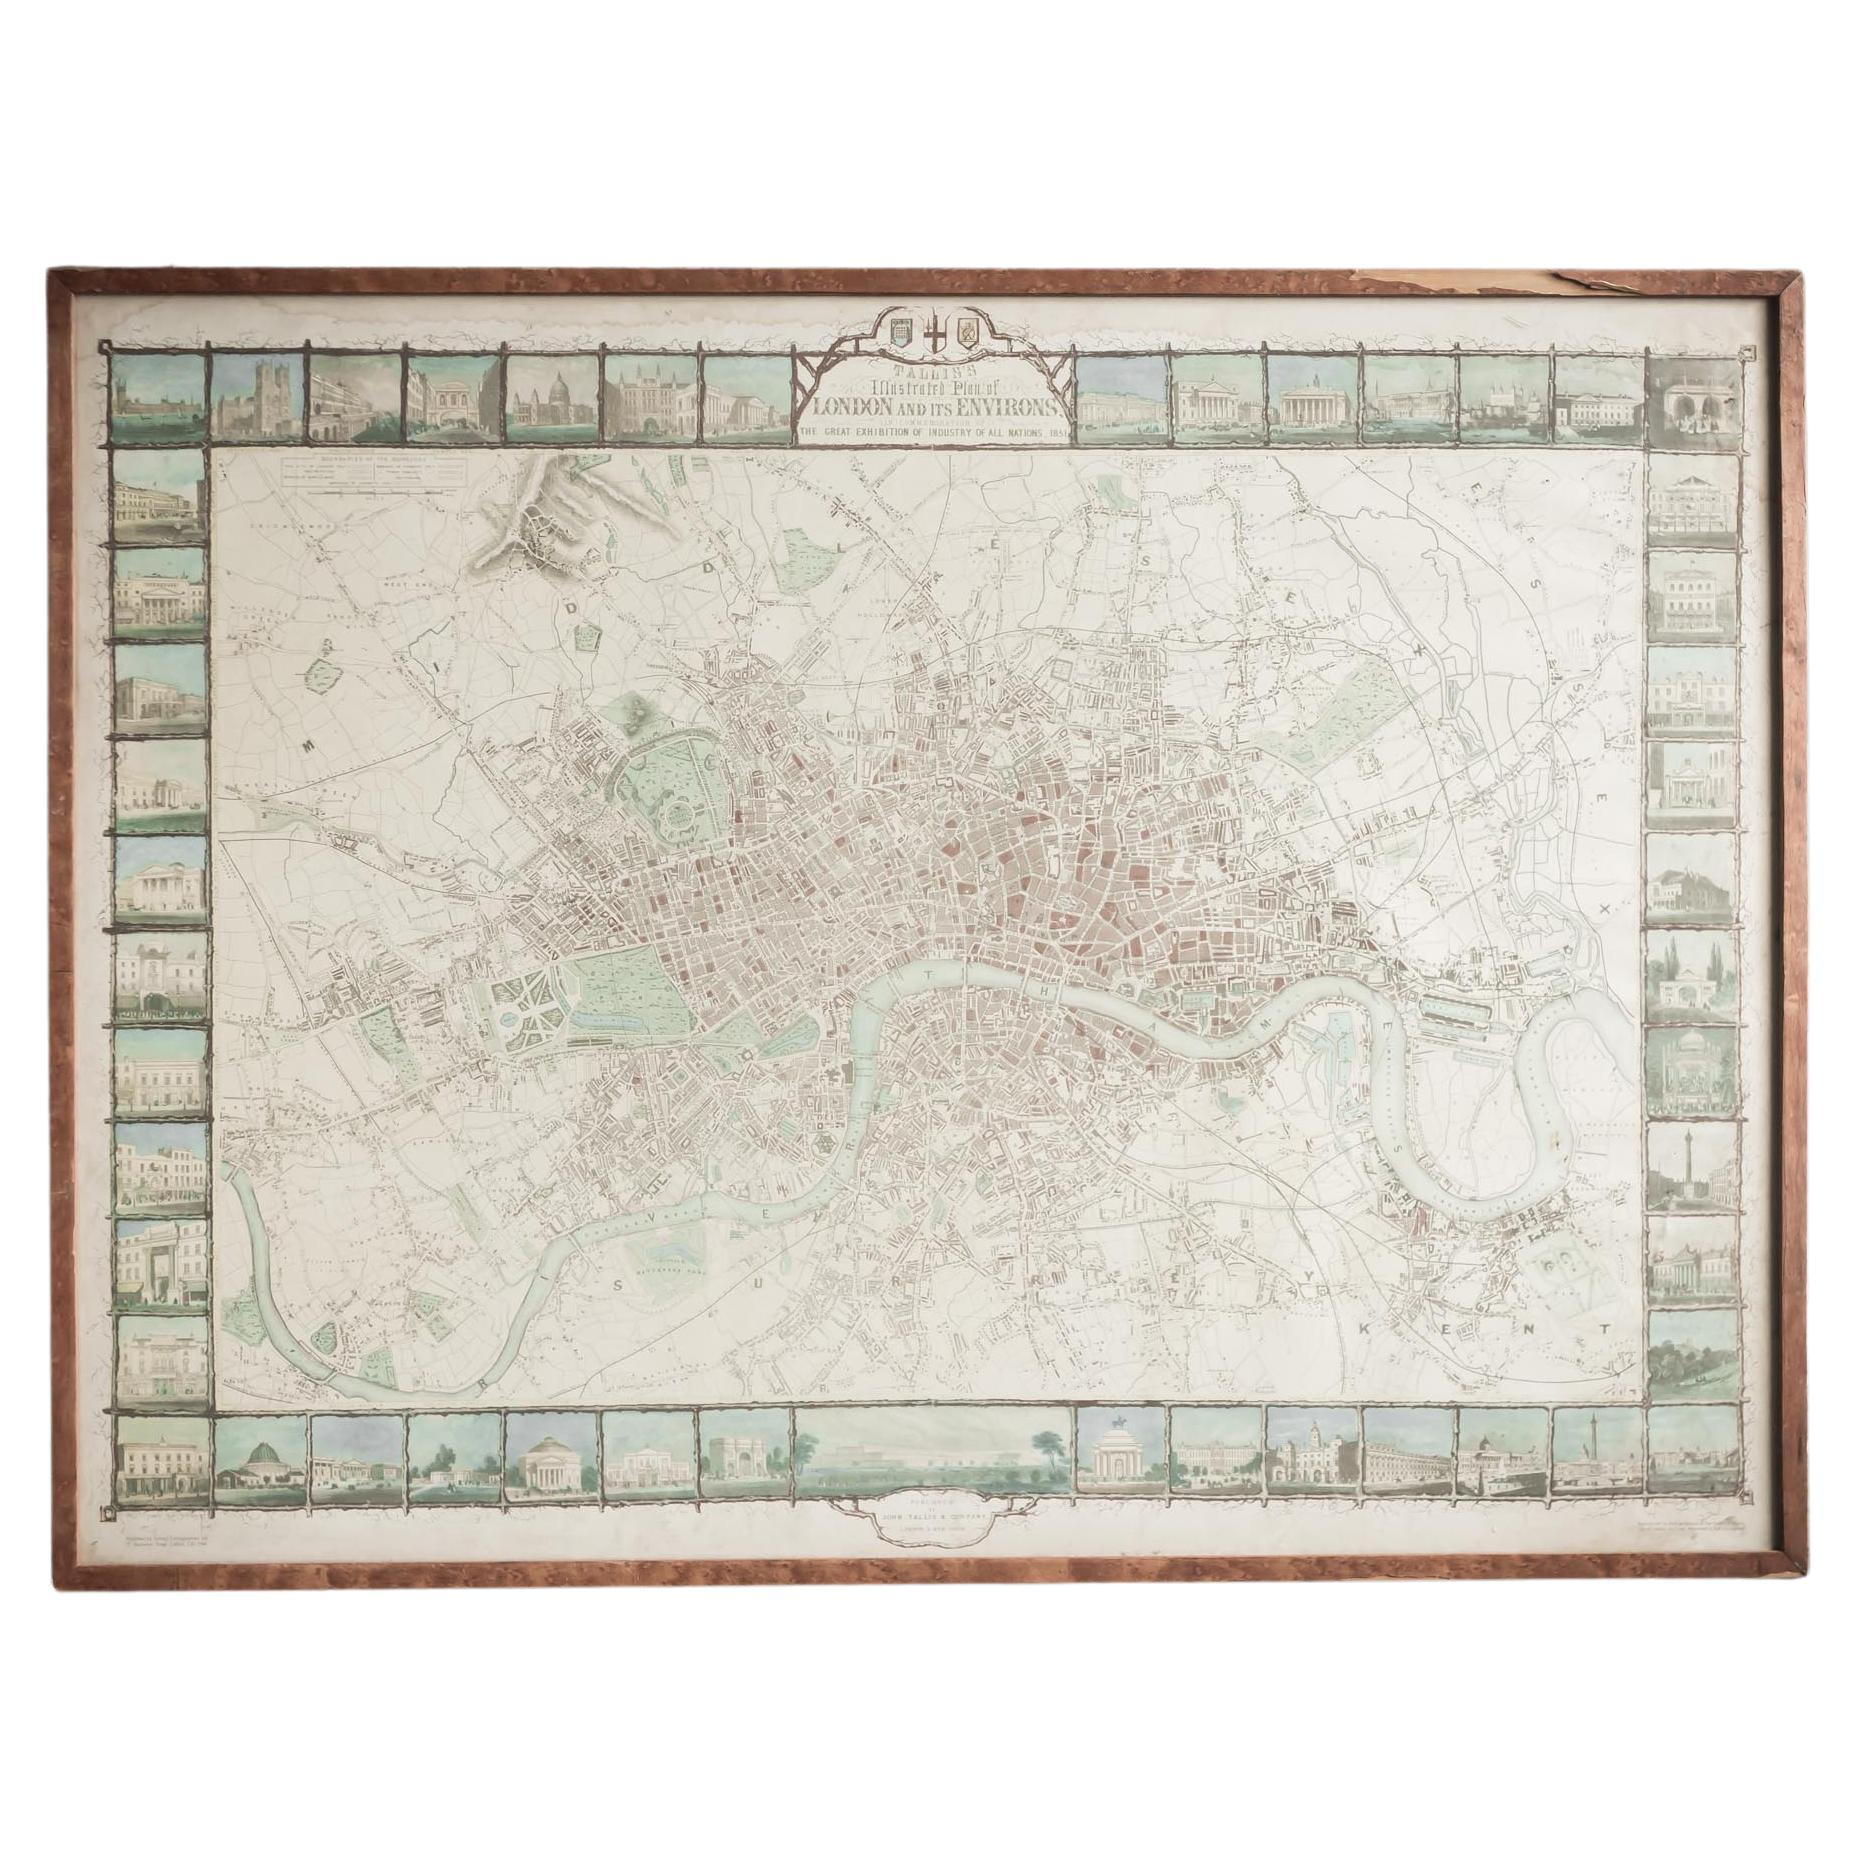 Illustrated Map of London from Exhibtion For Sale